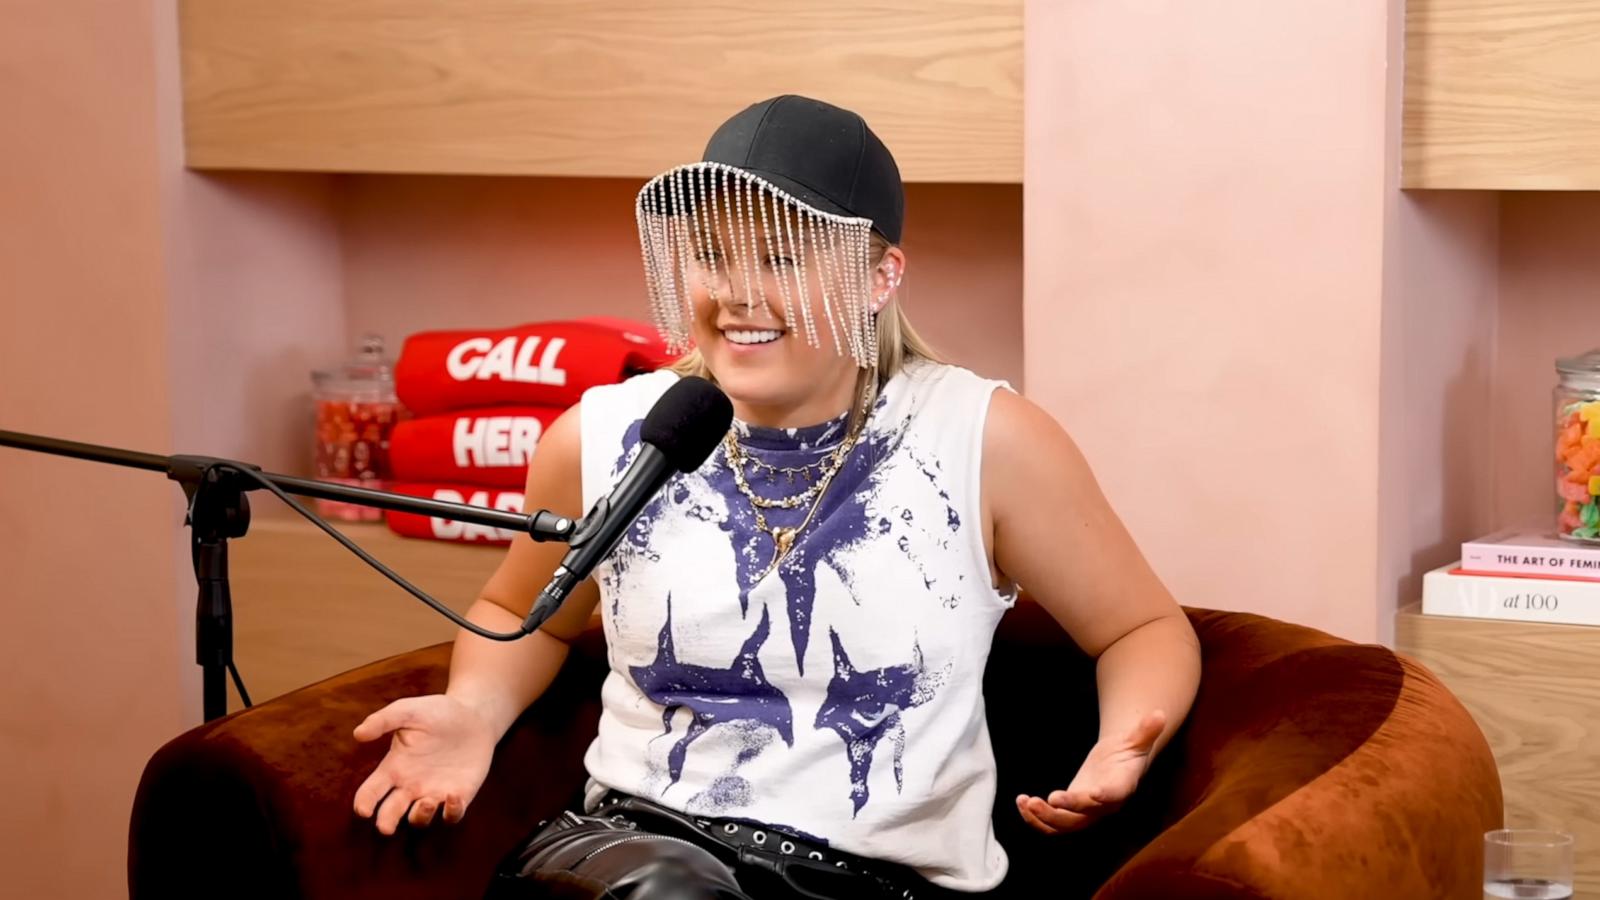 PHOTO: JoJo Siwa appears on the "Call Her Daddy" YouTube podcast.